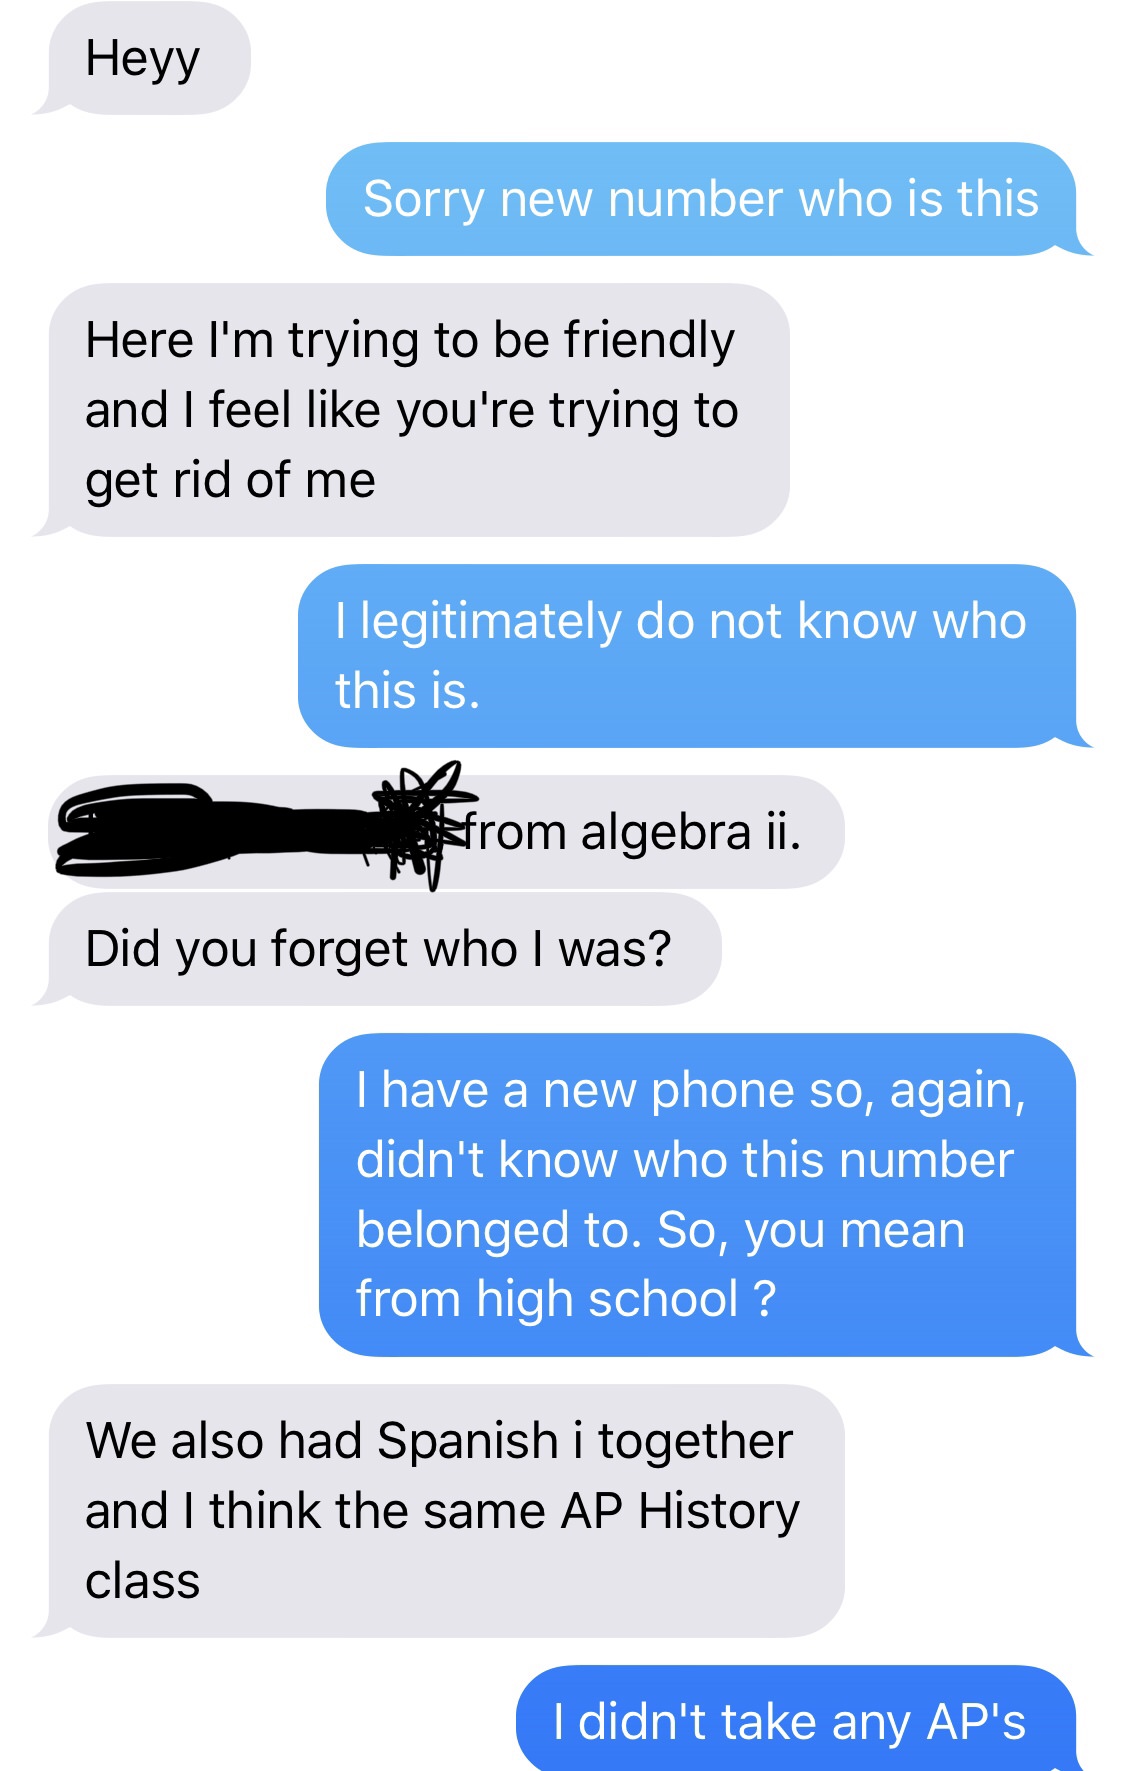 Cringe-Inducing Creepy Guy from High School Resurfaces to Continue Stalking Girl